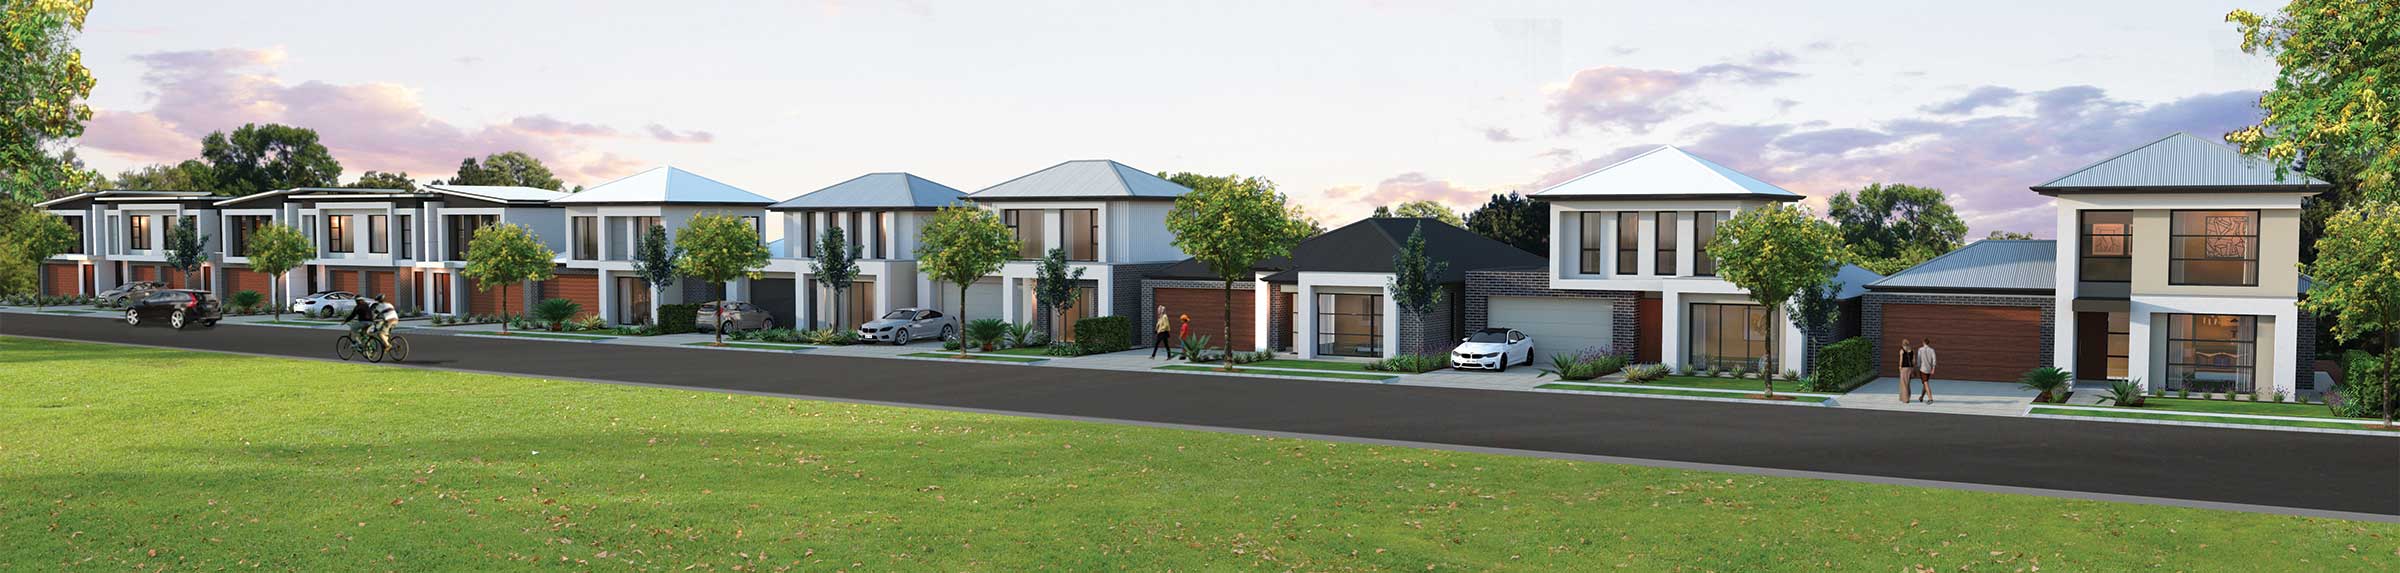 External architectural impression of finalised housing development.